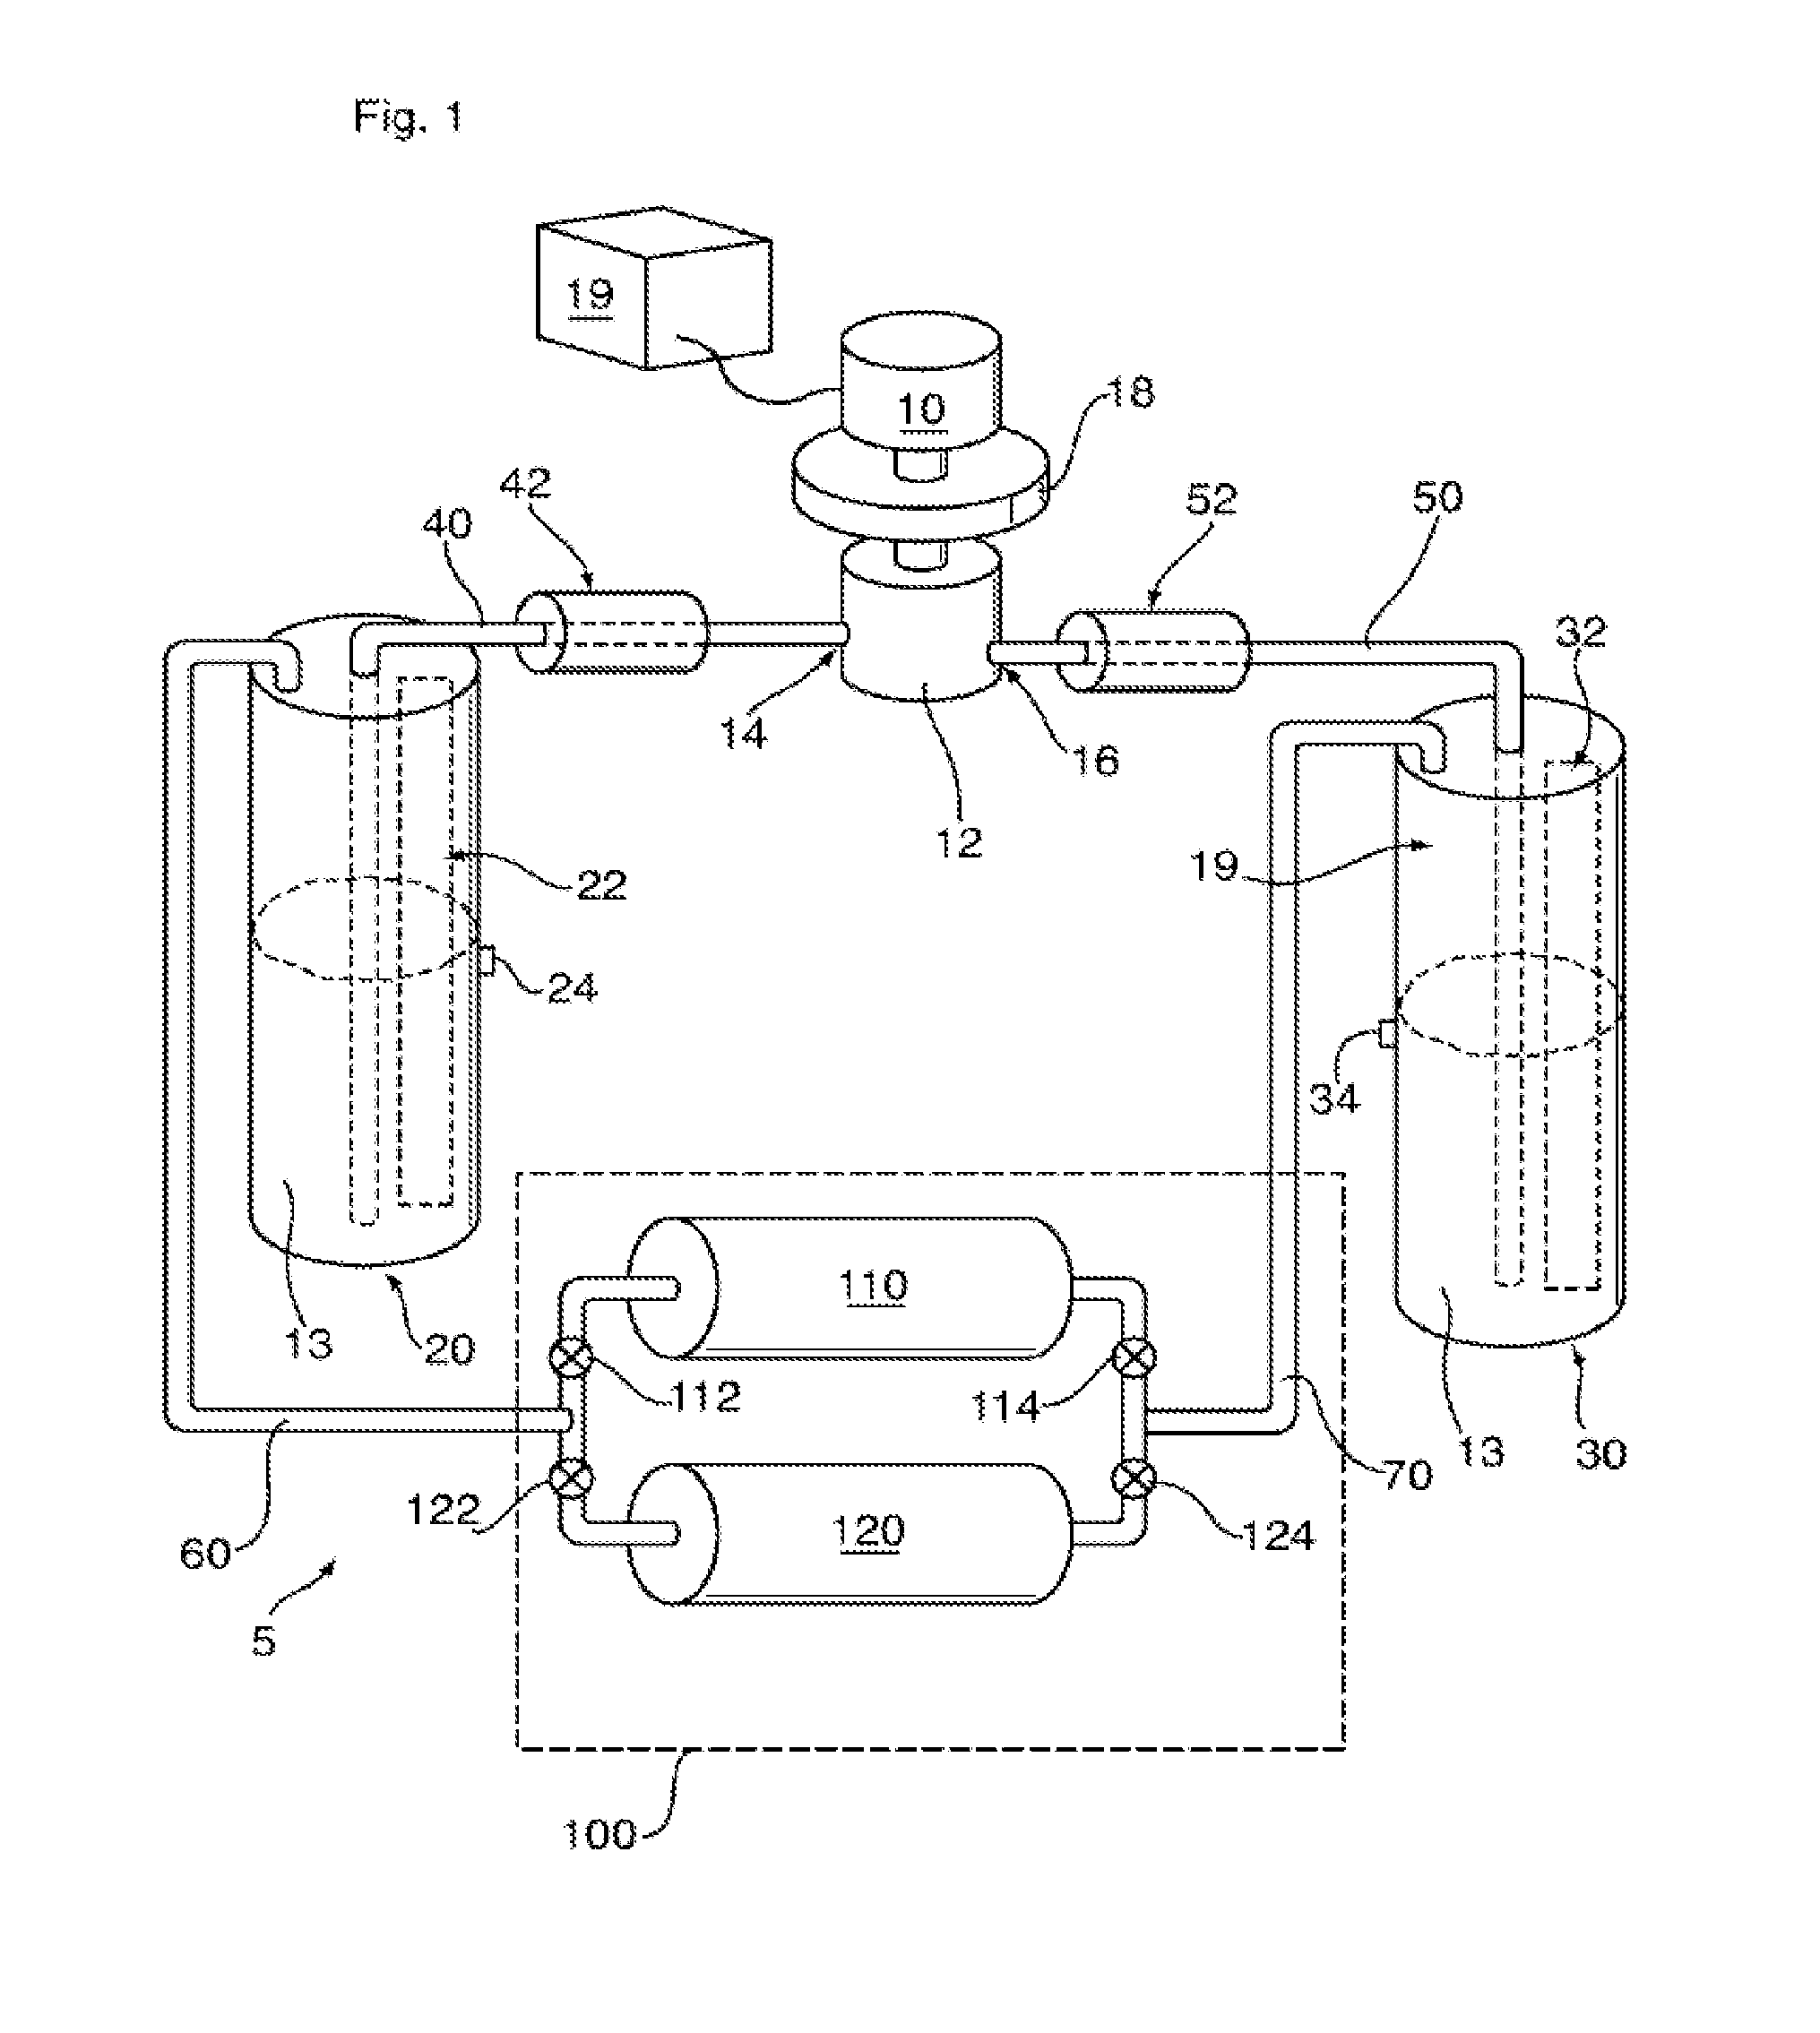 System and method for energy storage and retrieval